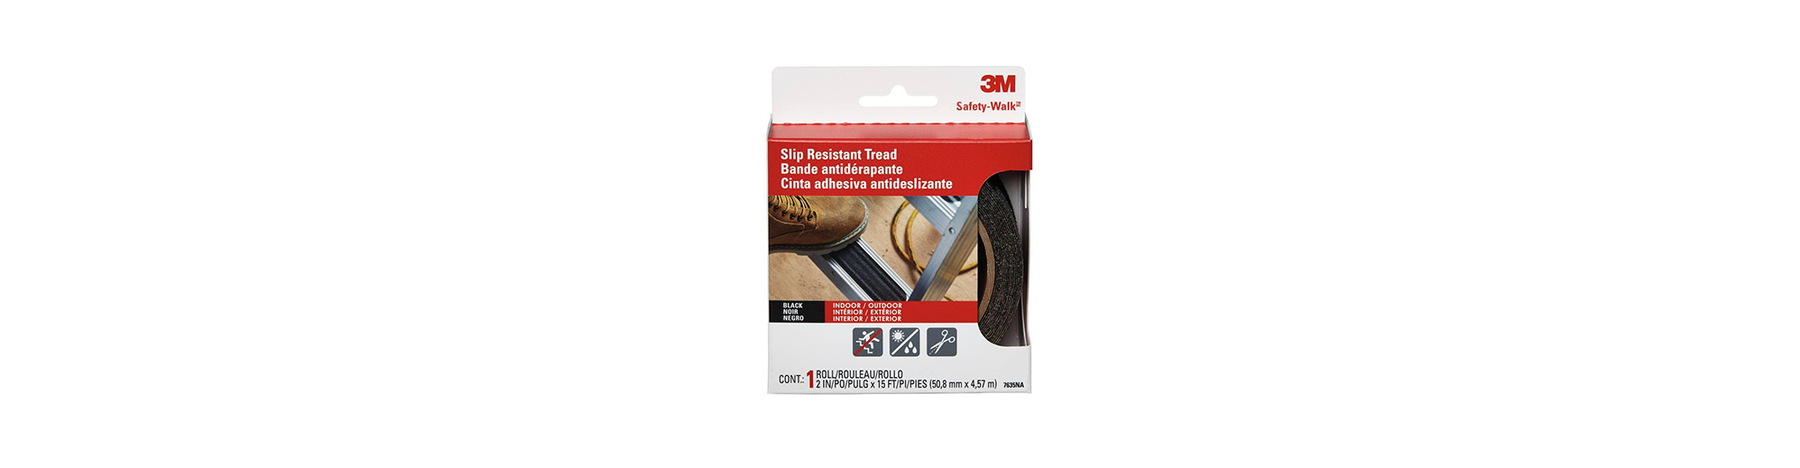 Increase Workplace Safety with 3M Safety-Walk Tape